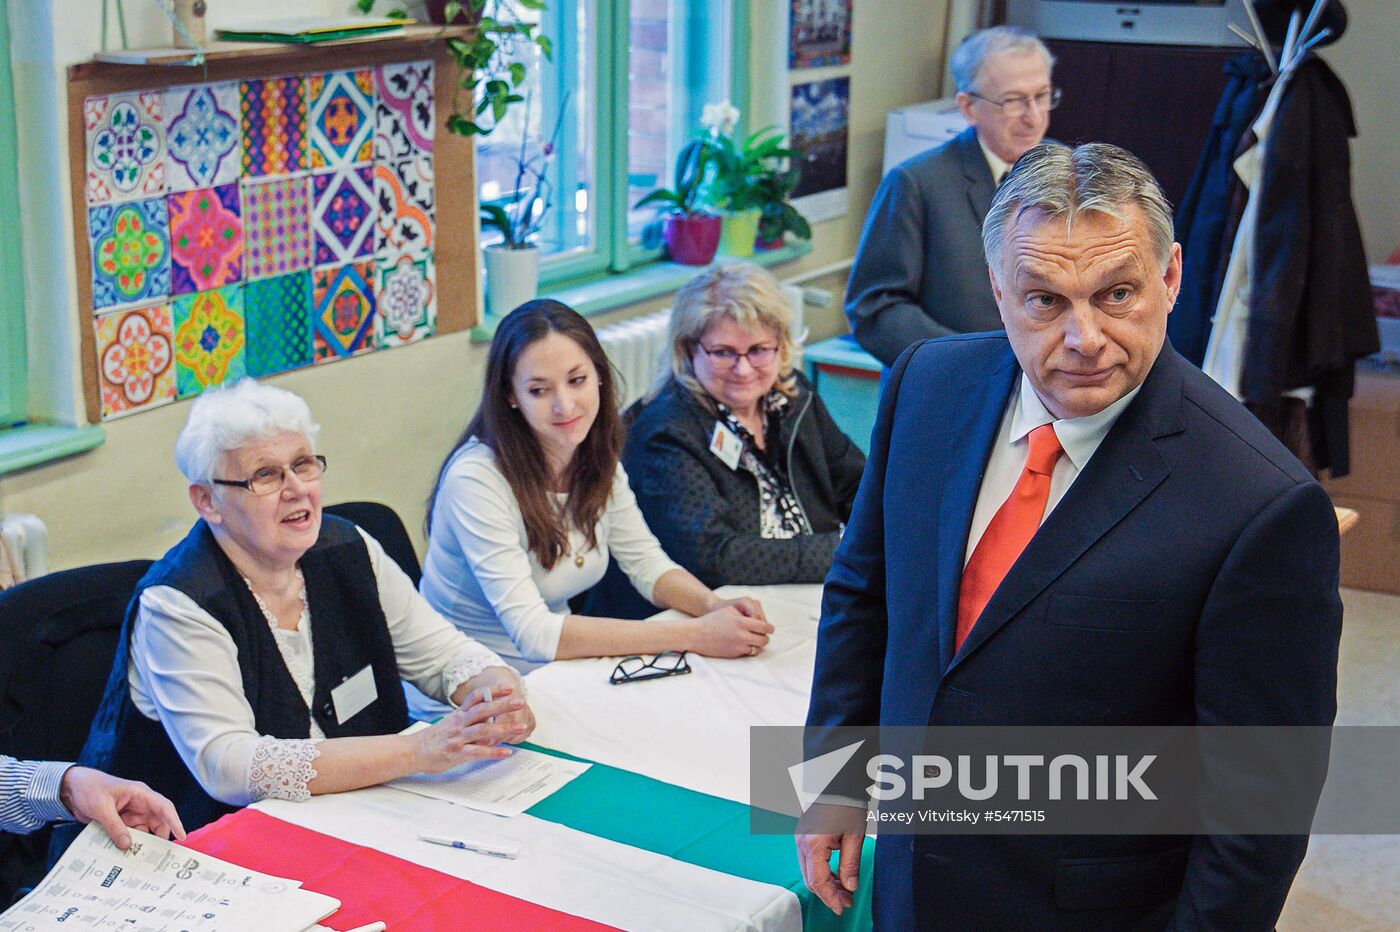 Parliamentary election in Hungary